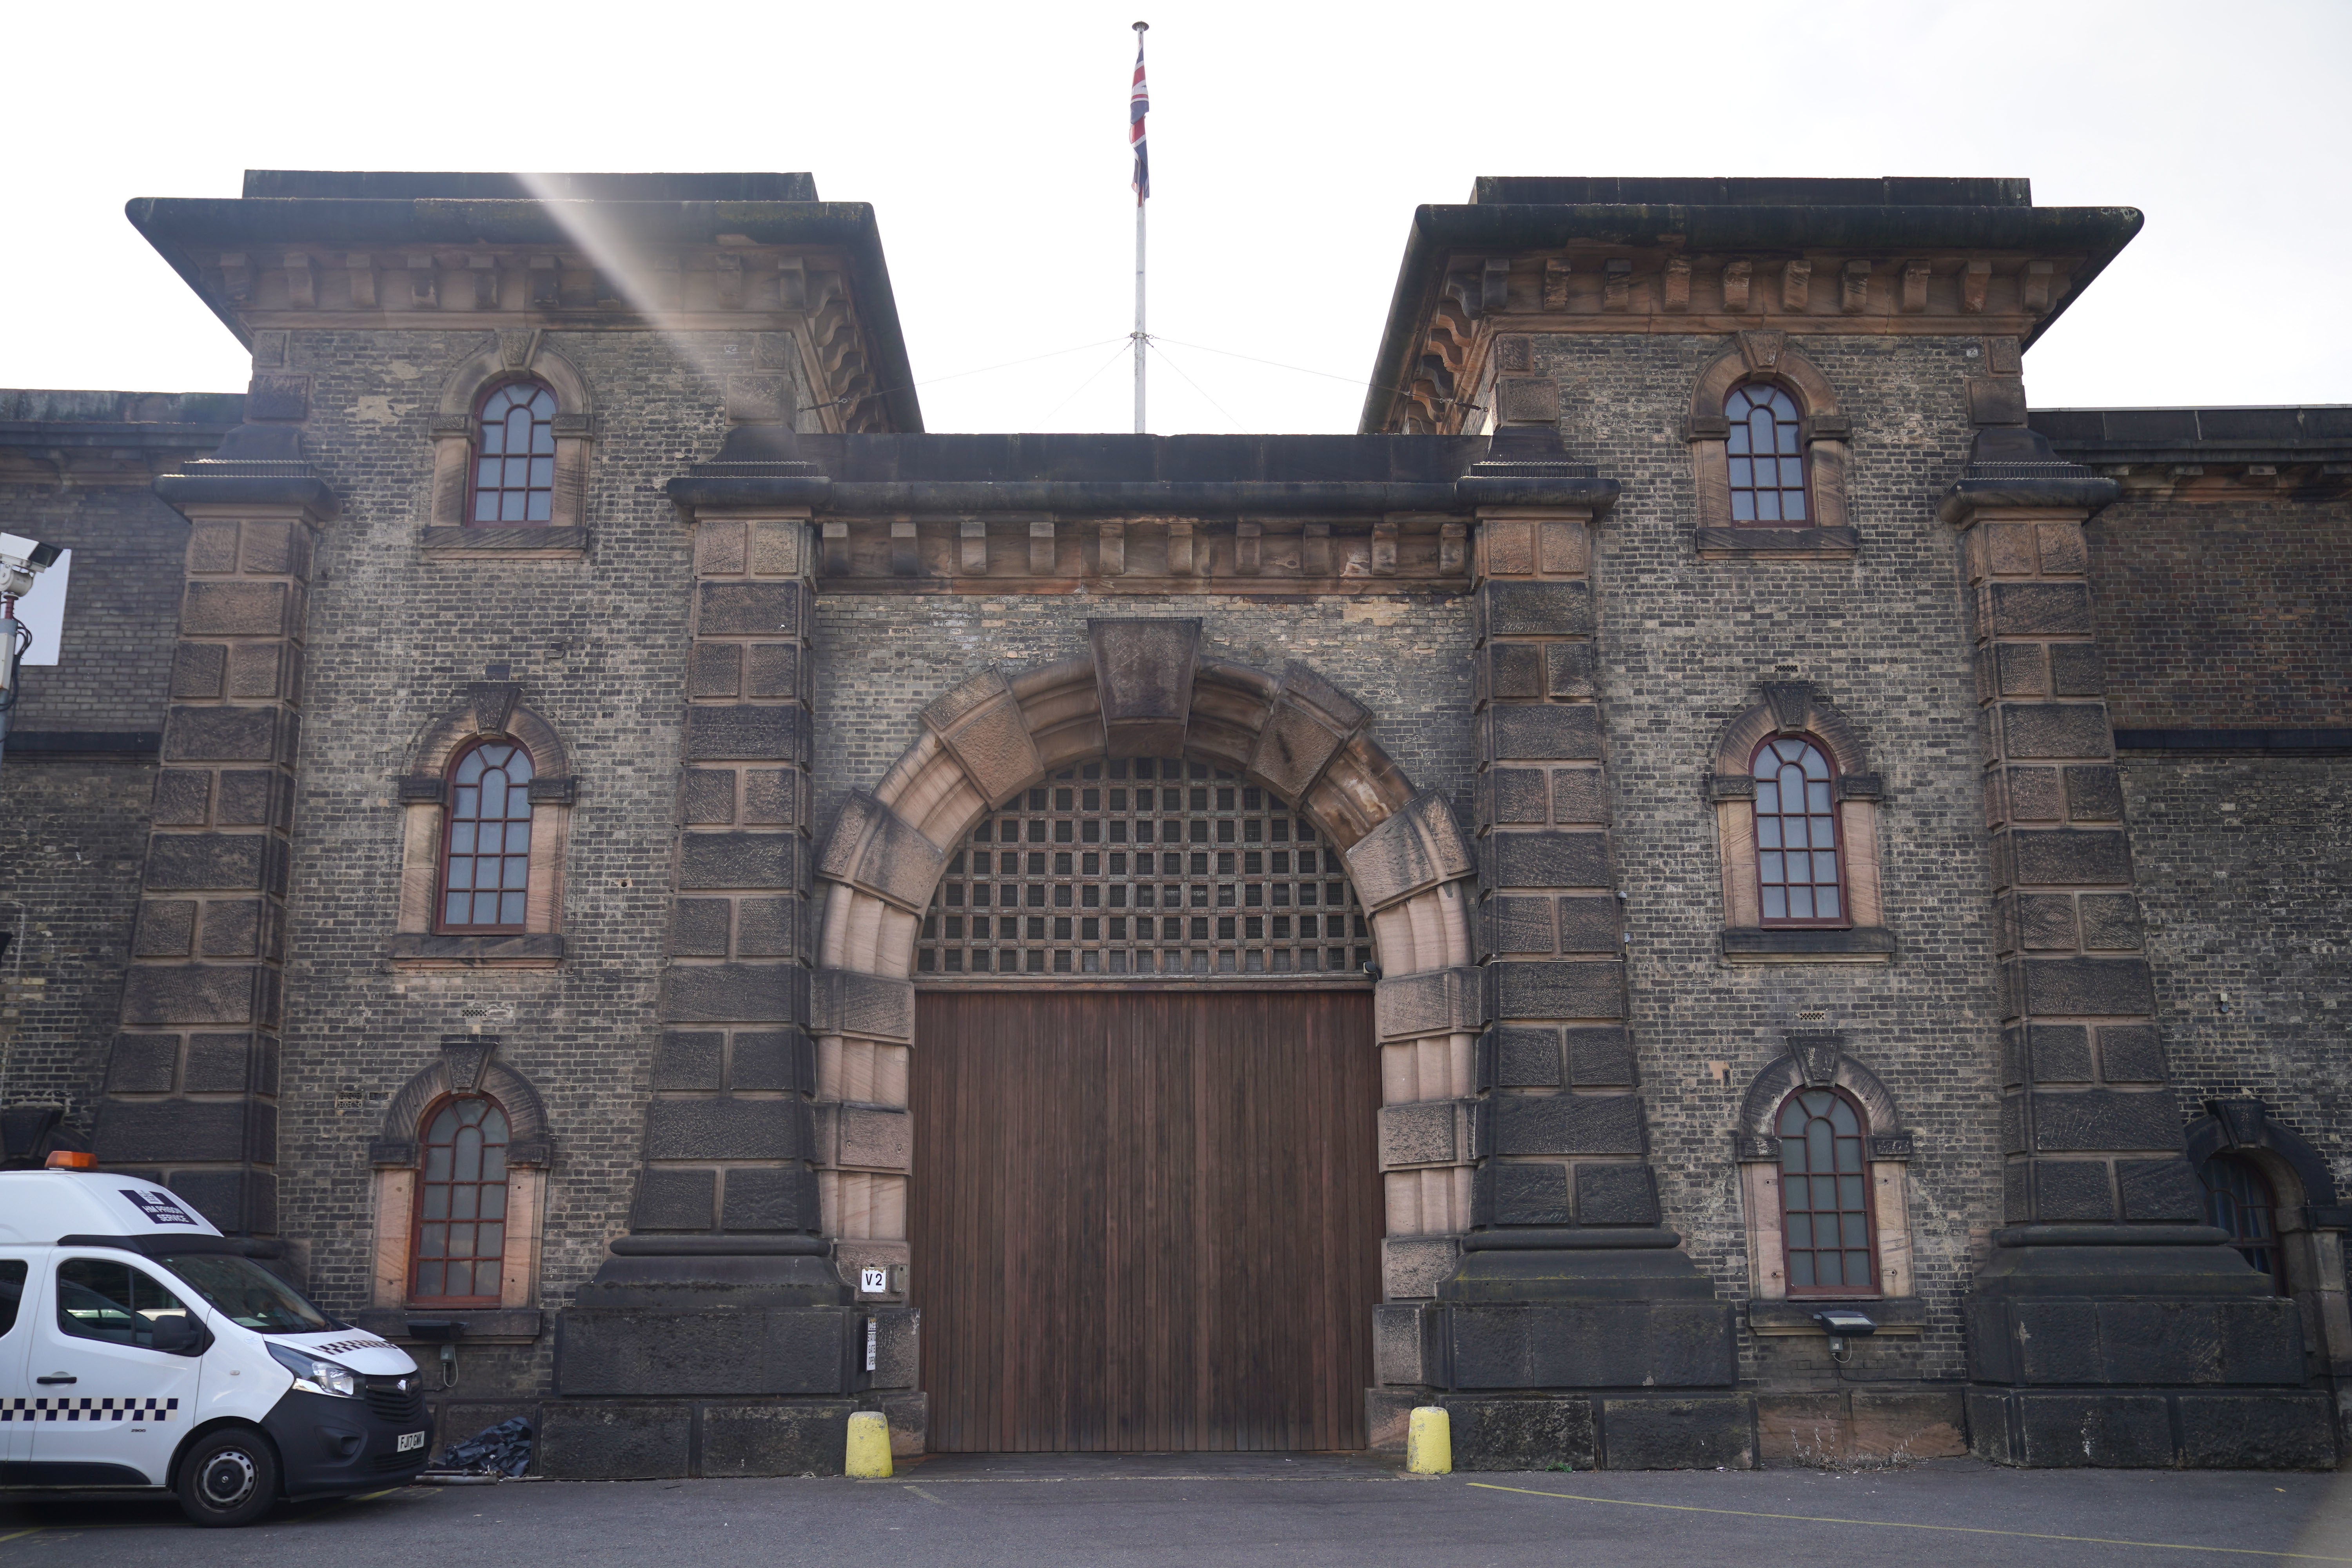 Most staff at HMP Wandsworth are ‘very inexperienced’, the prisons inspector has said